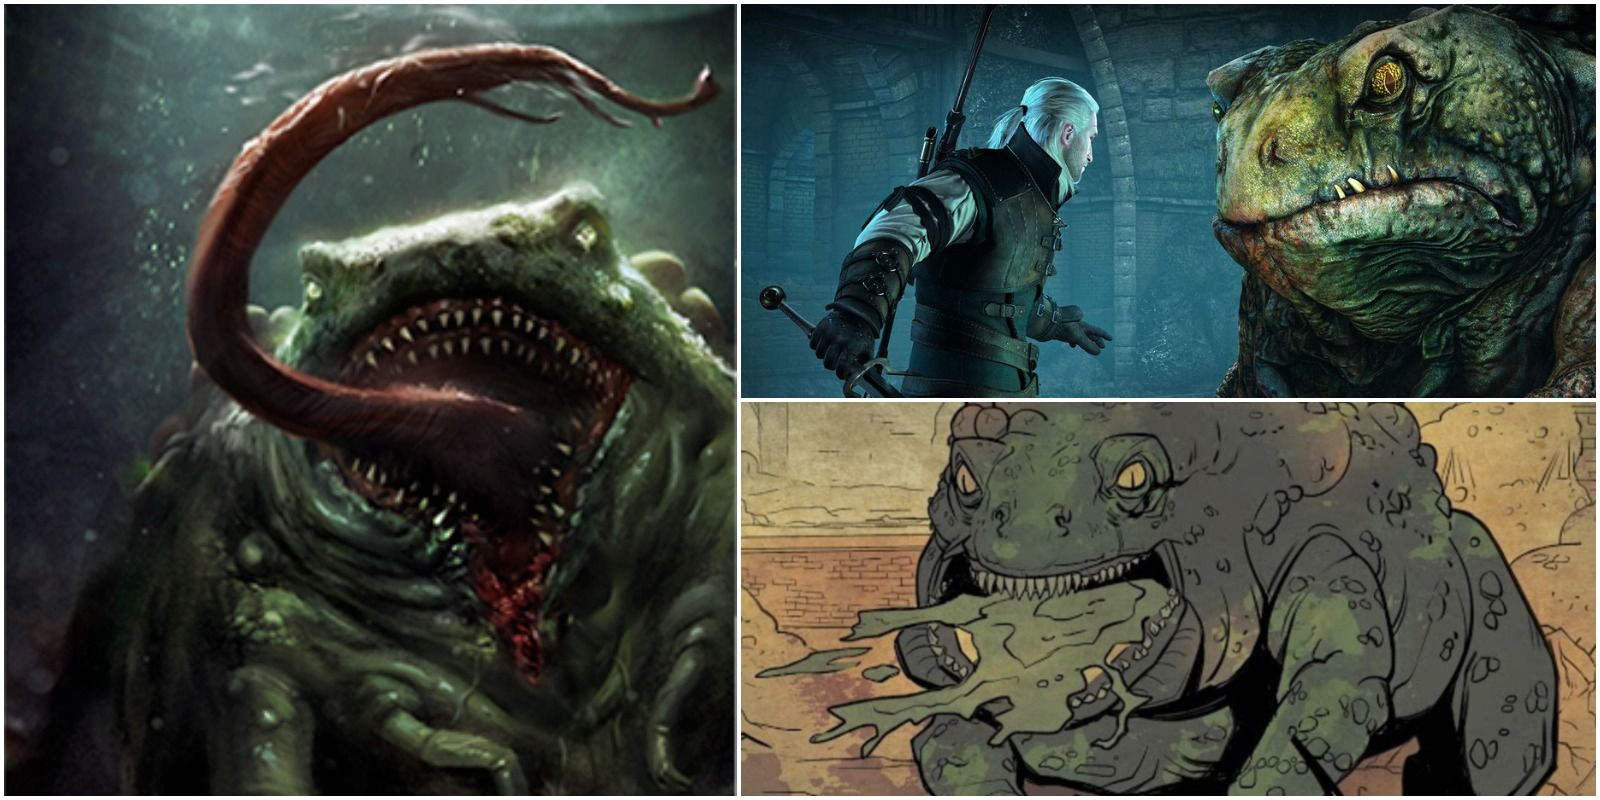 the toad prince from gwent, the witcher 3, and the witcher comics.